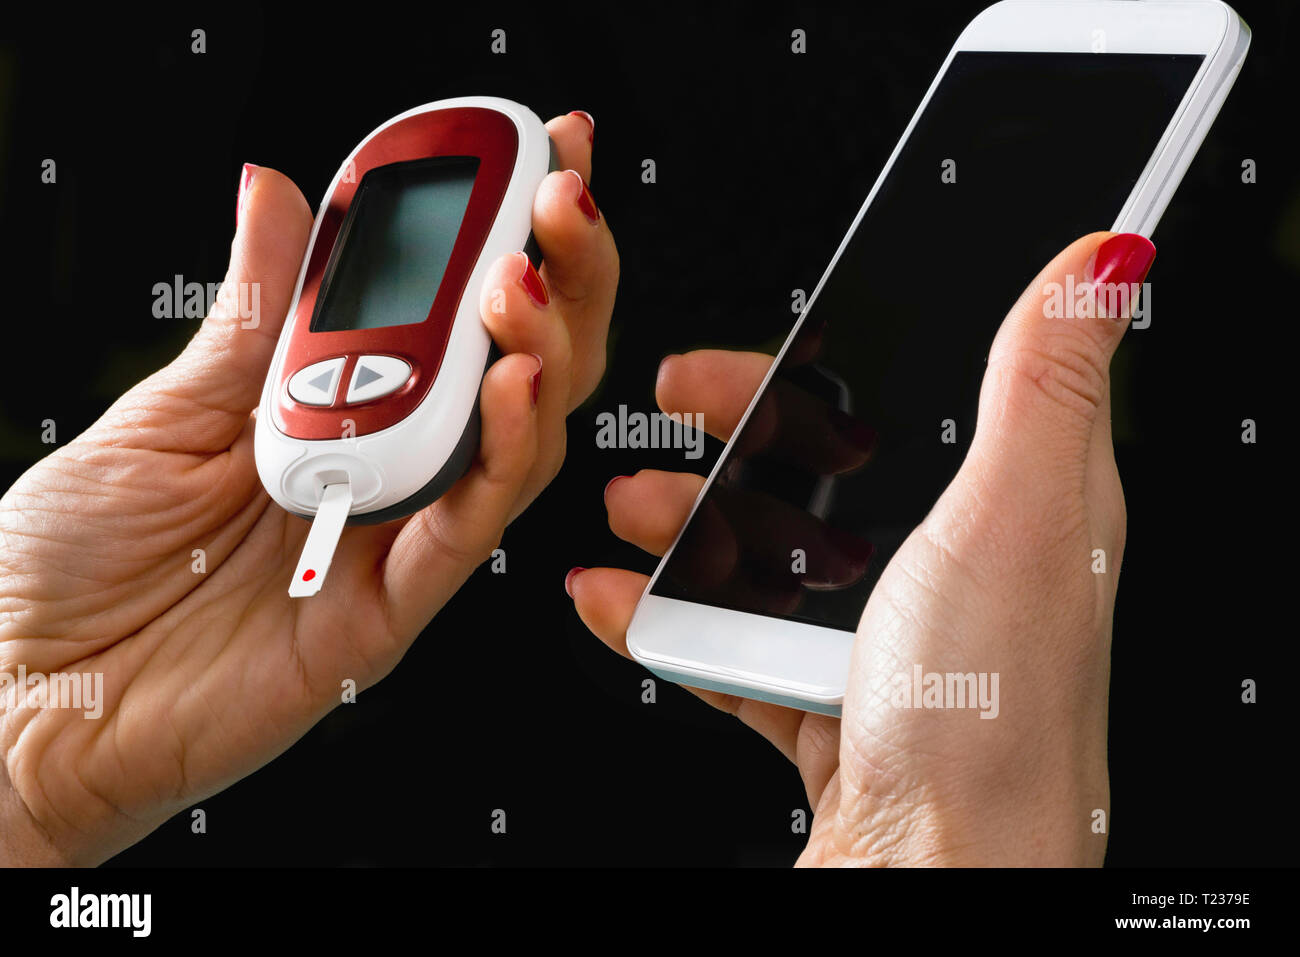 Portable healthcare technology. Blood sugar test kit combined with smart phone. Stock Photo